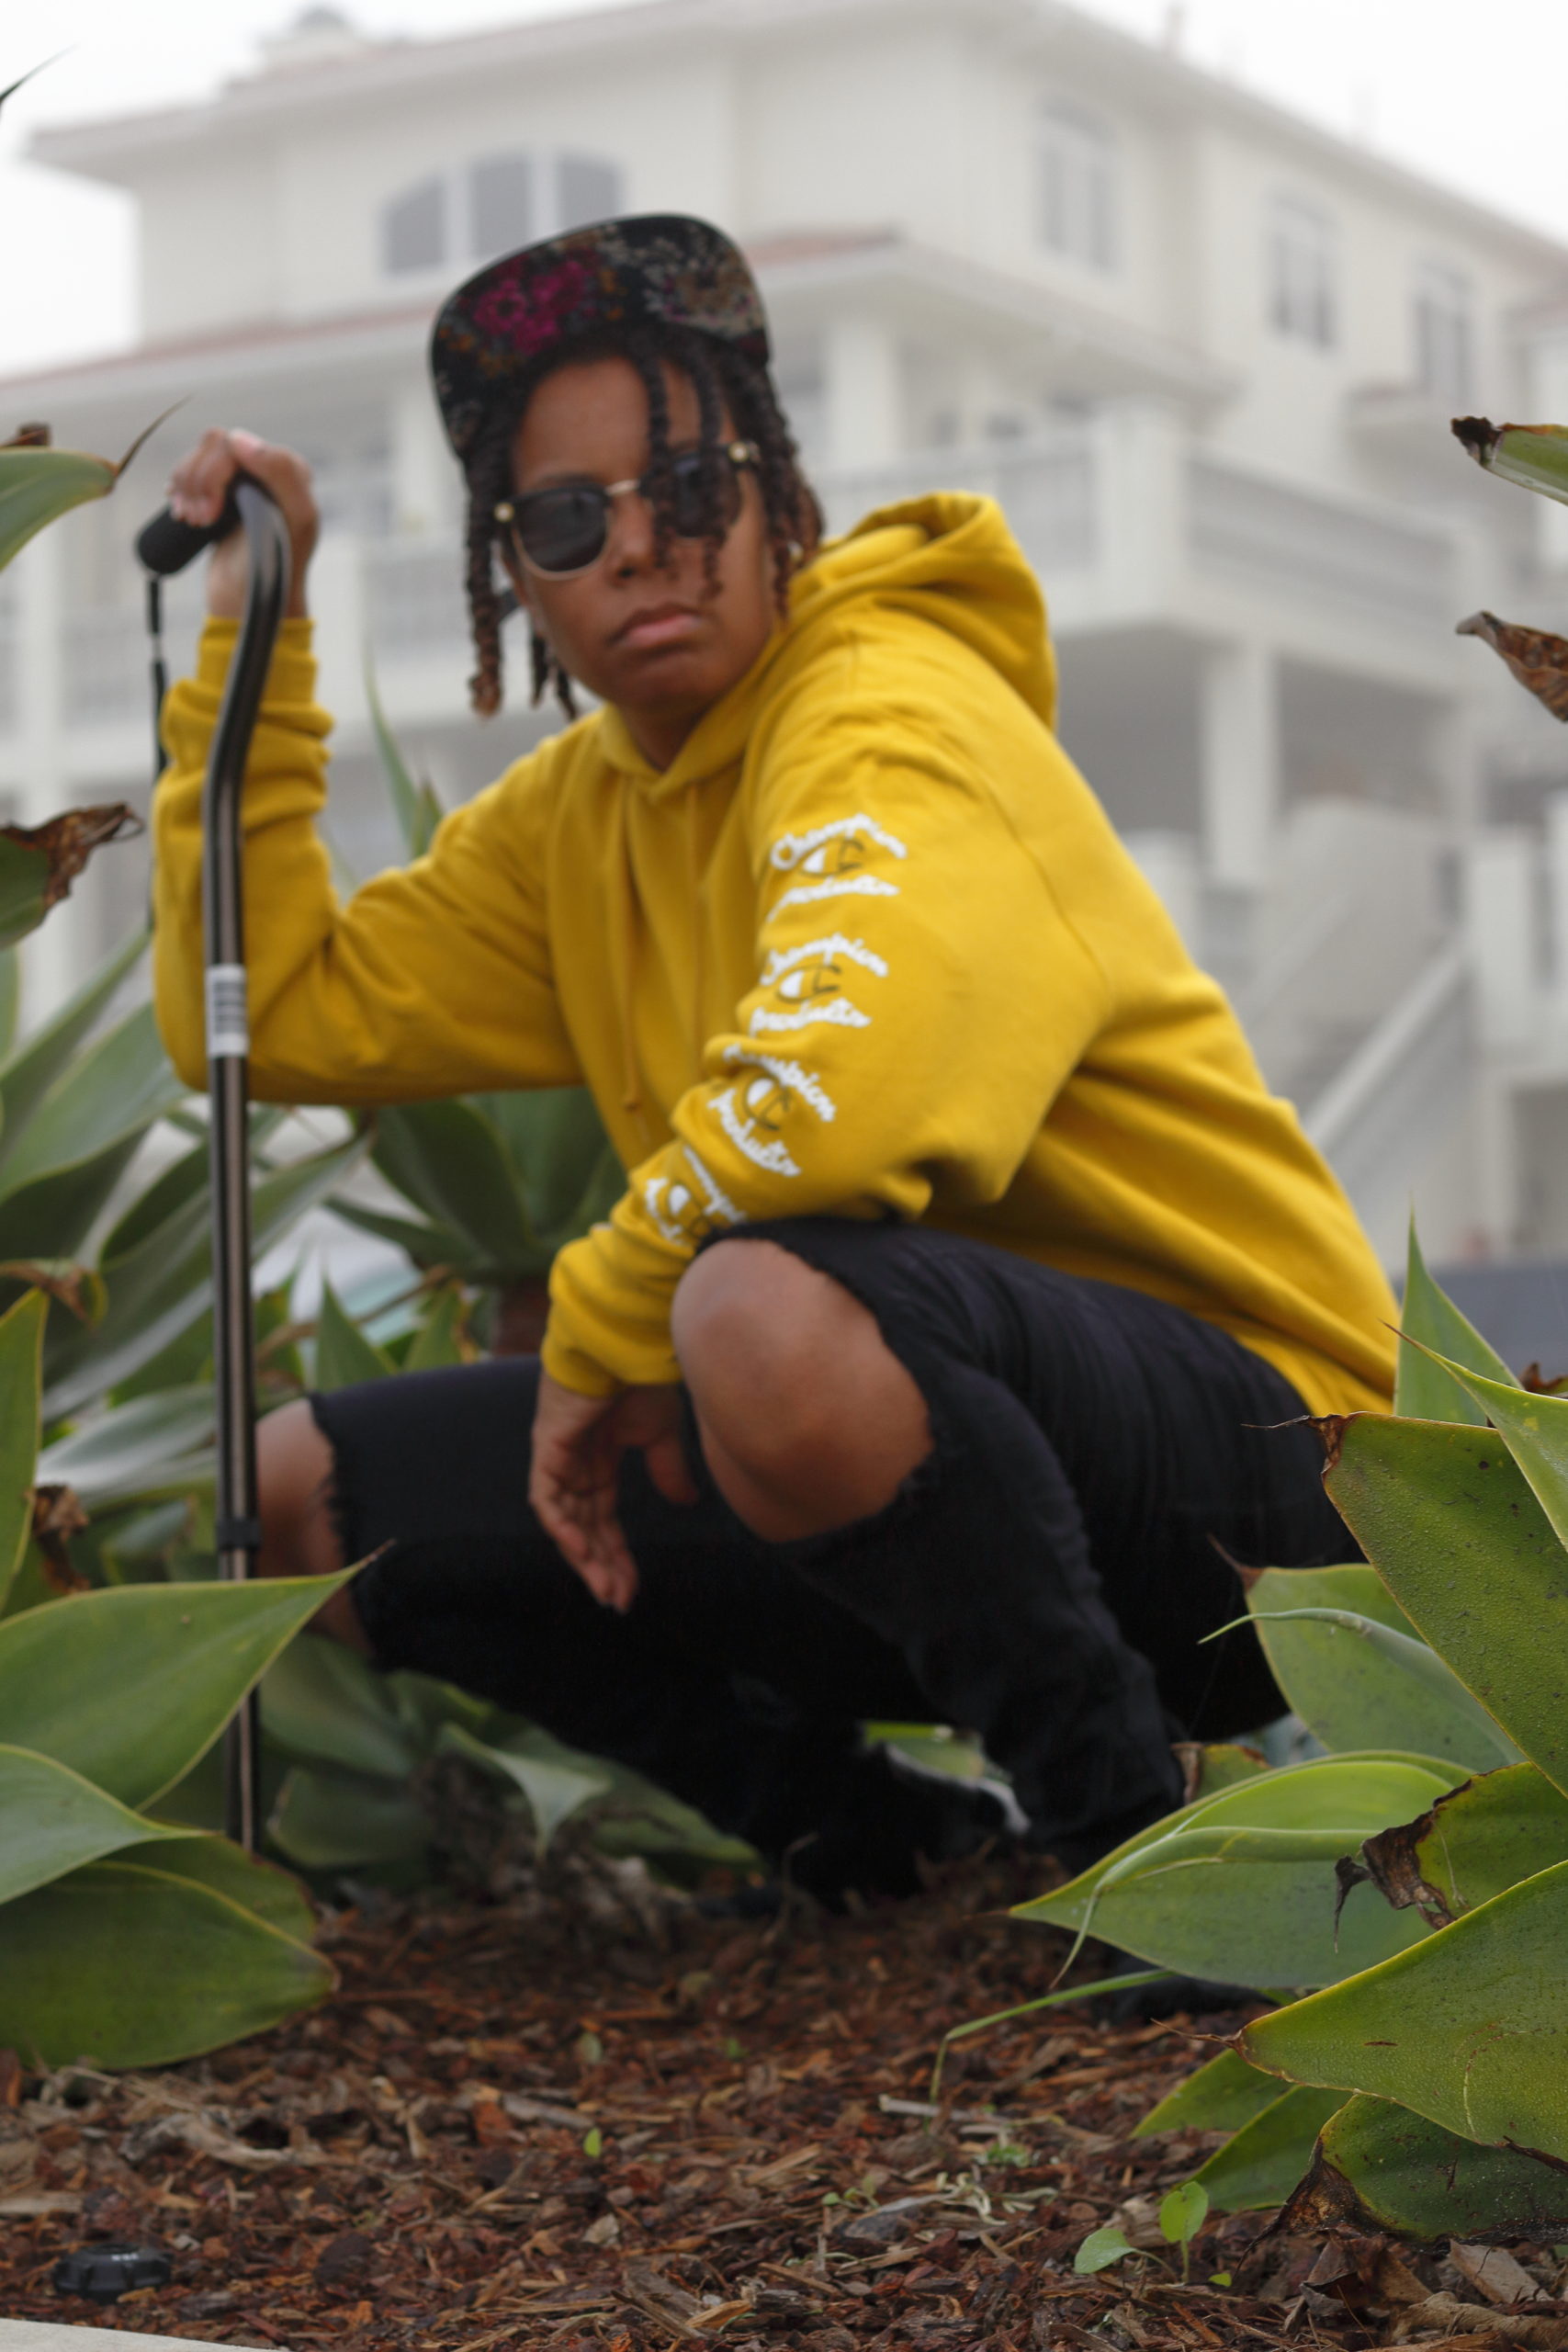 B. Alexander - Shot By Jay - Champion Campaign - Plant Life